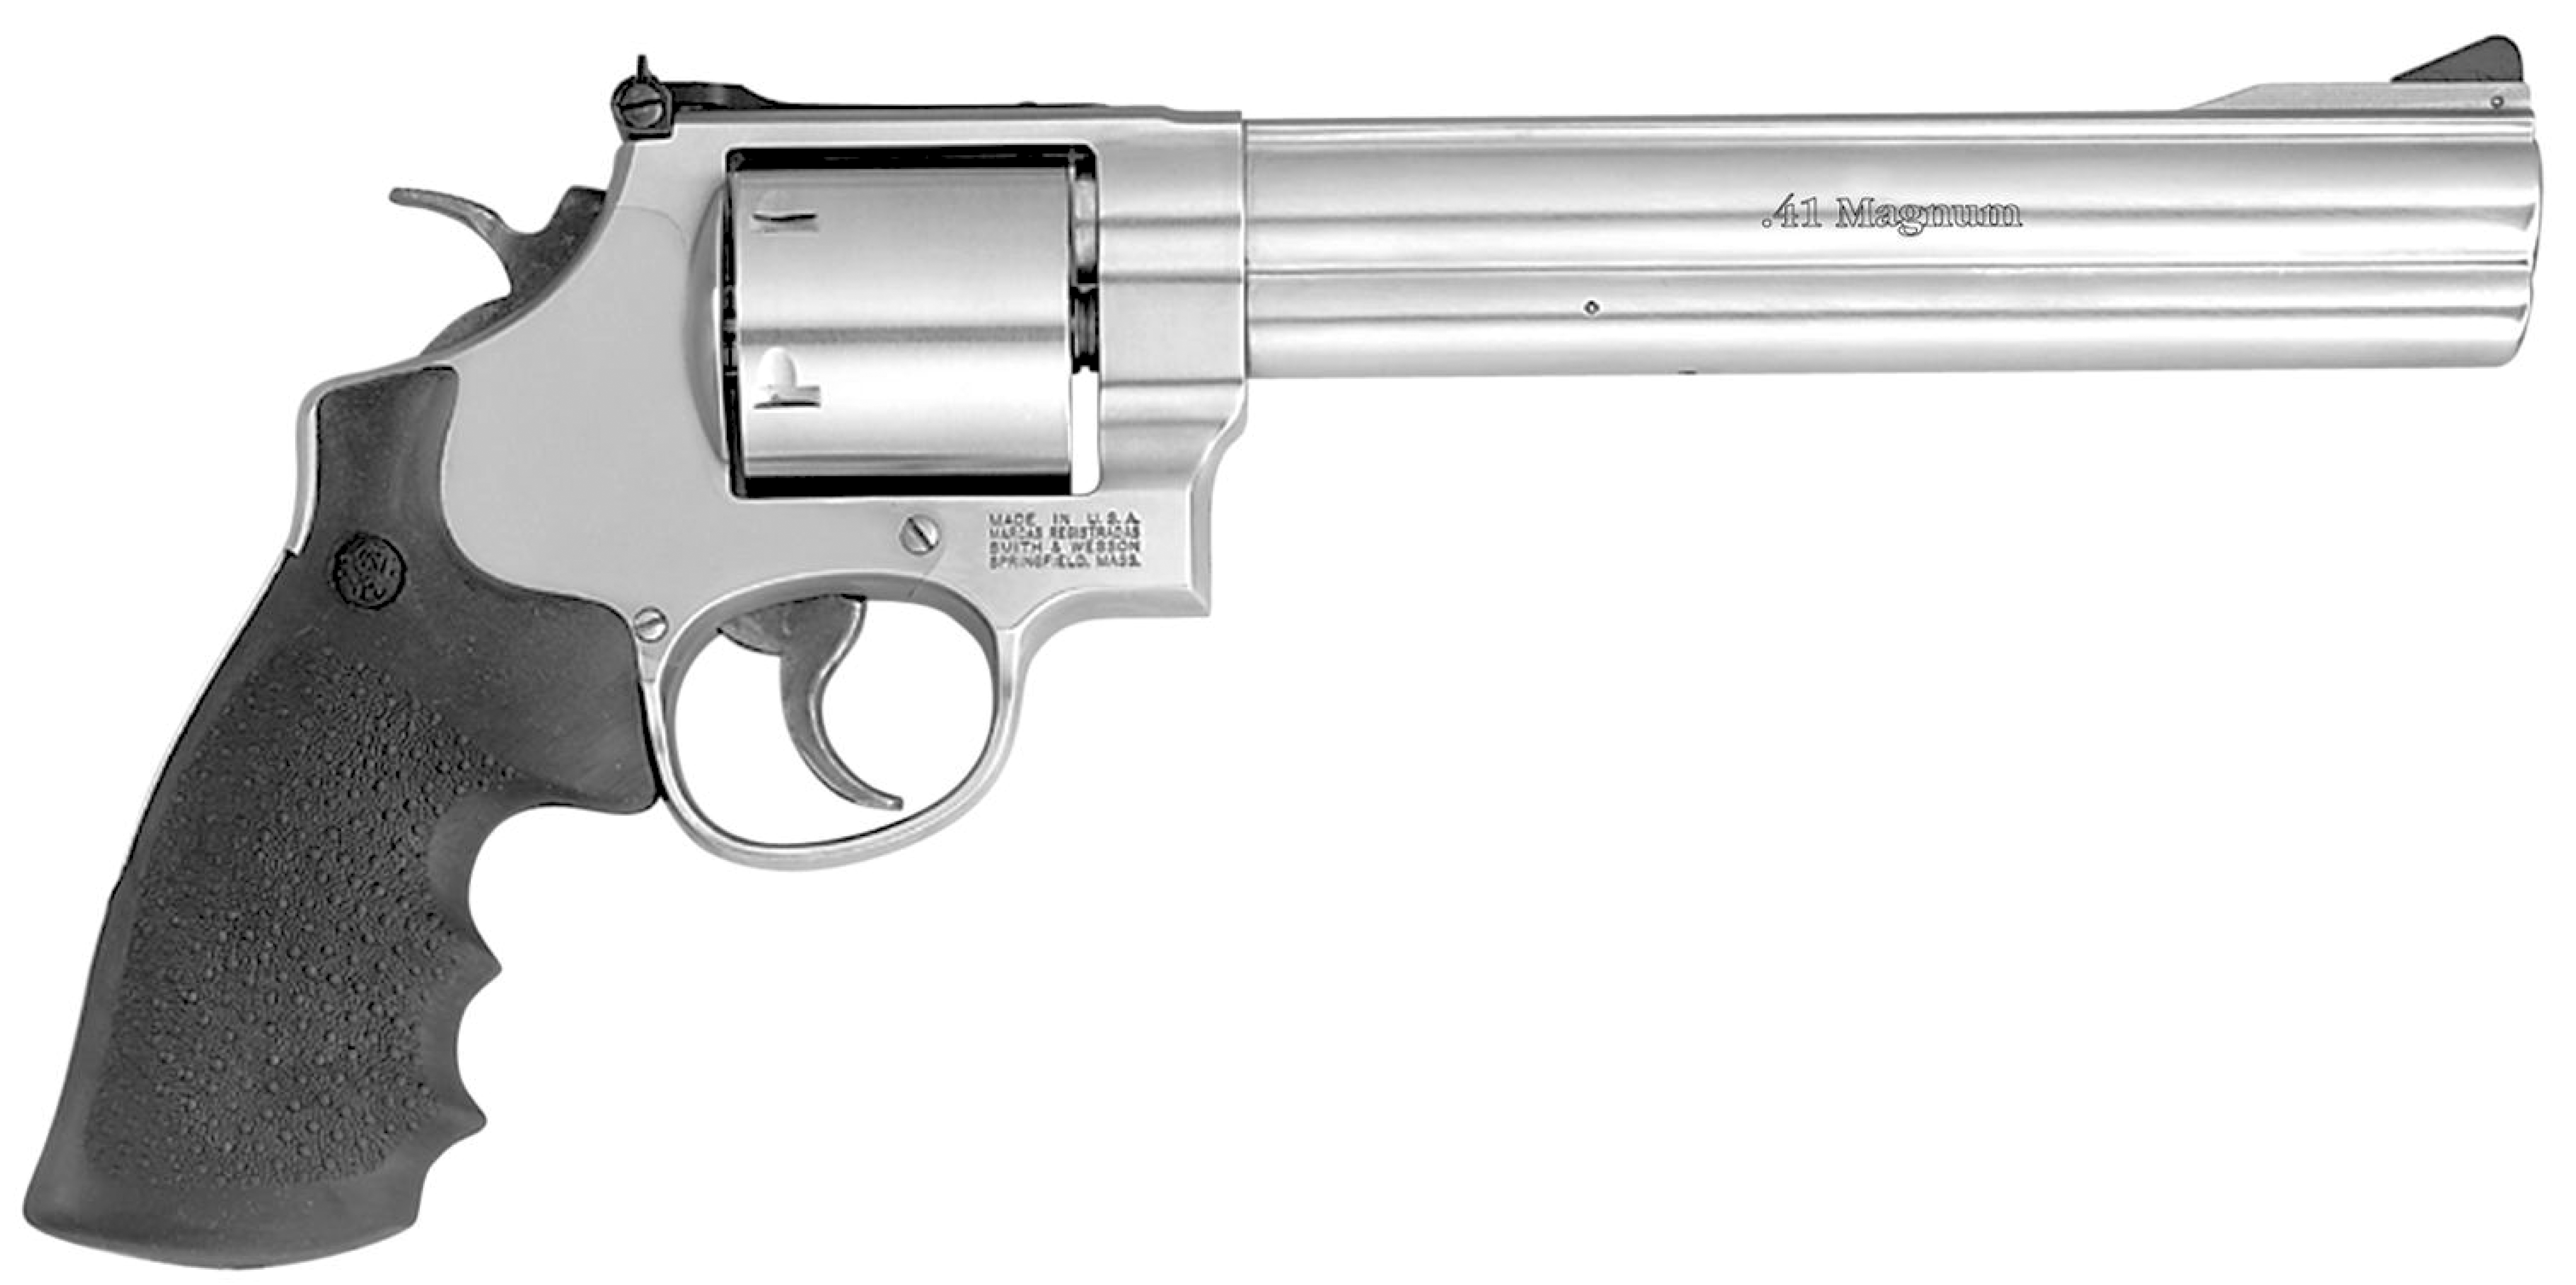 smith-wesson-model-657-classic-gun-values-by-gun-digest